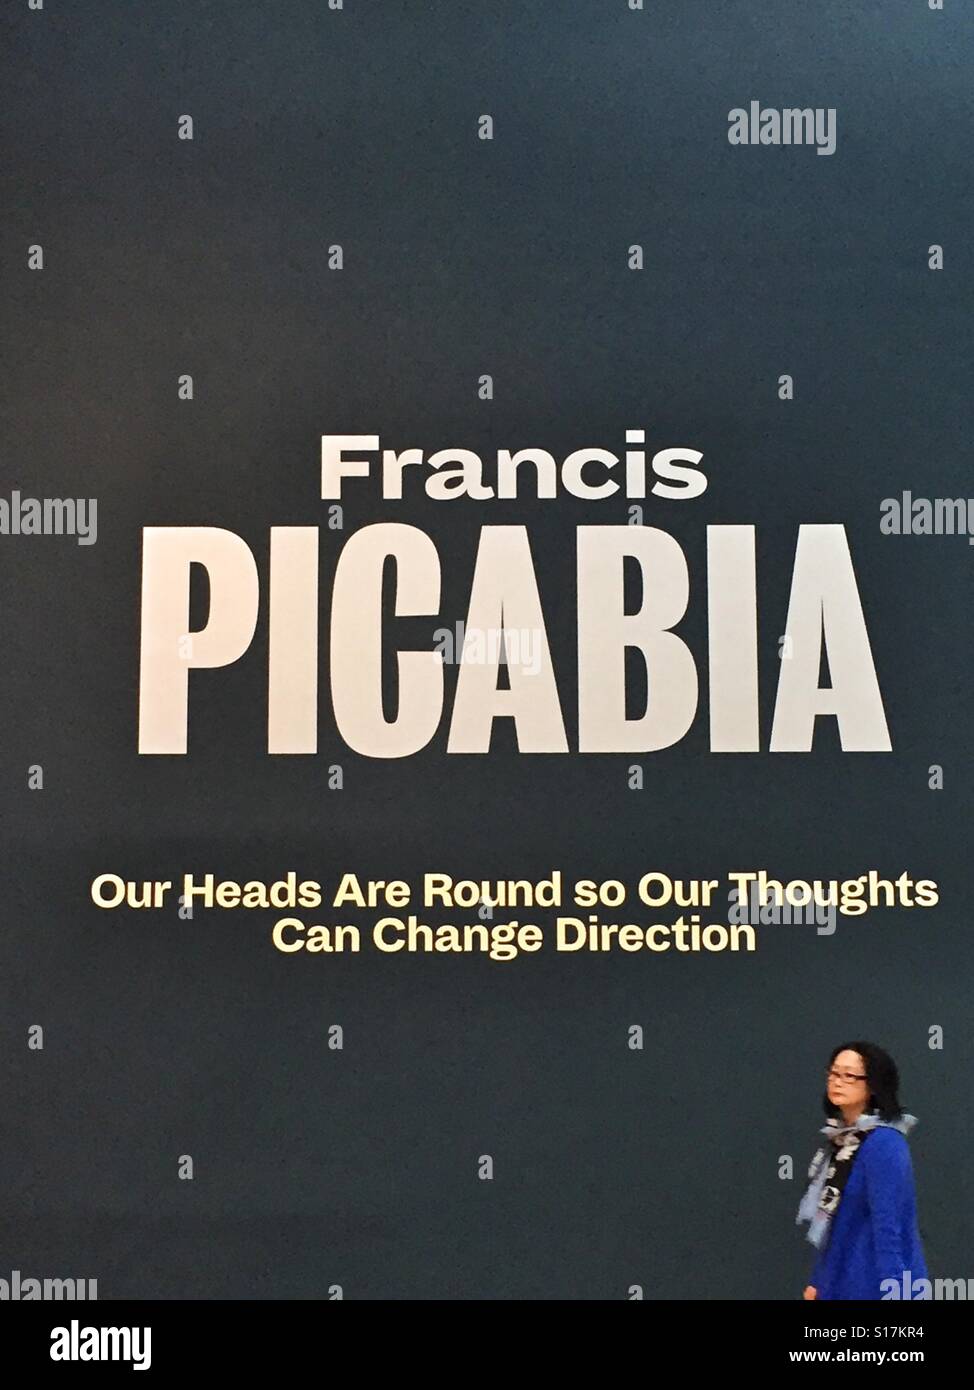 Francis Picabia MOMA exhibition, New York, entrance to gallery with quote 'Our Heads are round so our thoughts can change direction' Stock Photo